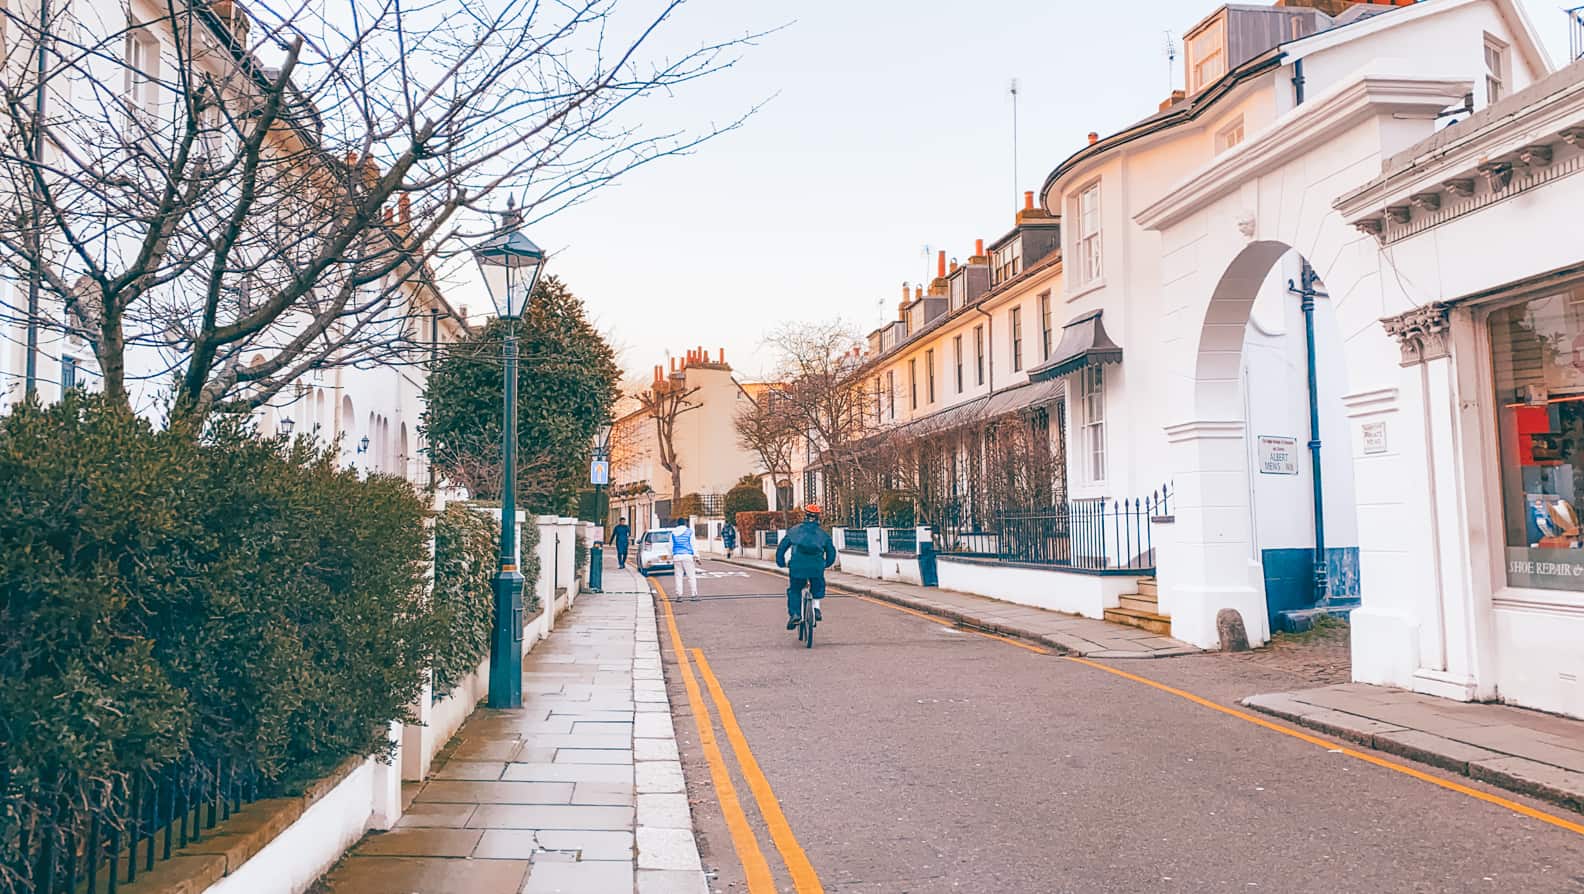 Best things to do in Kensington, South Kensington and Kensignton High Street